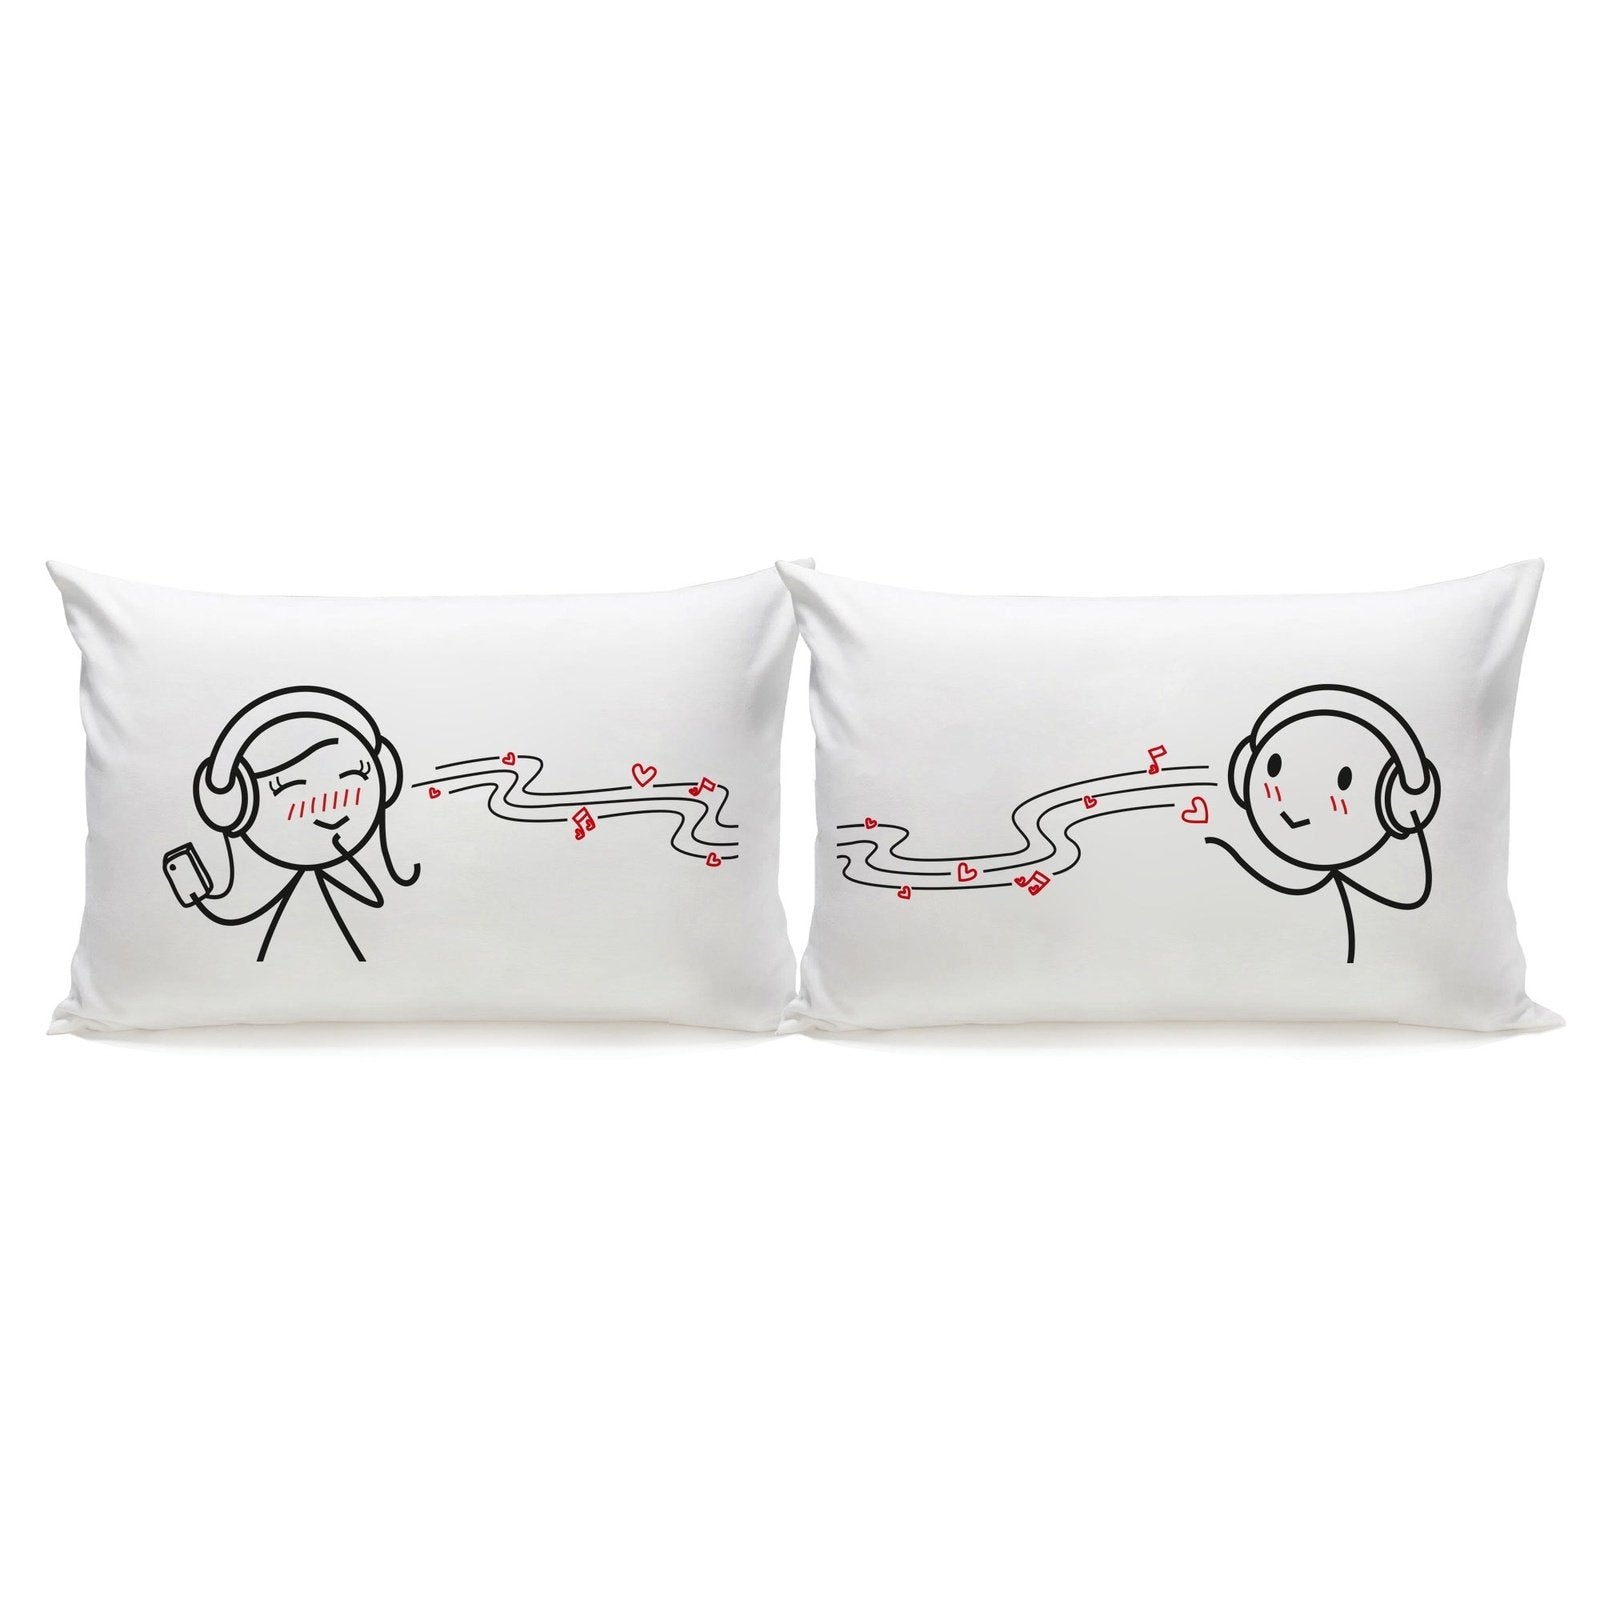 Synced in Love His and Hers pillowcase set from Human Touch